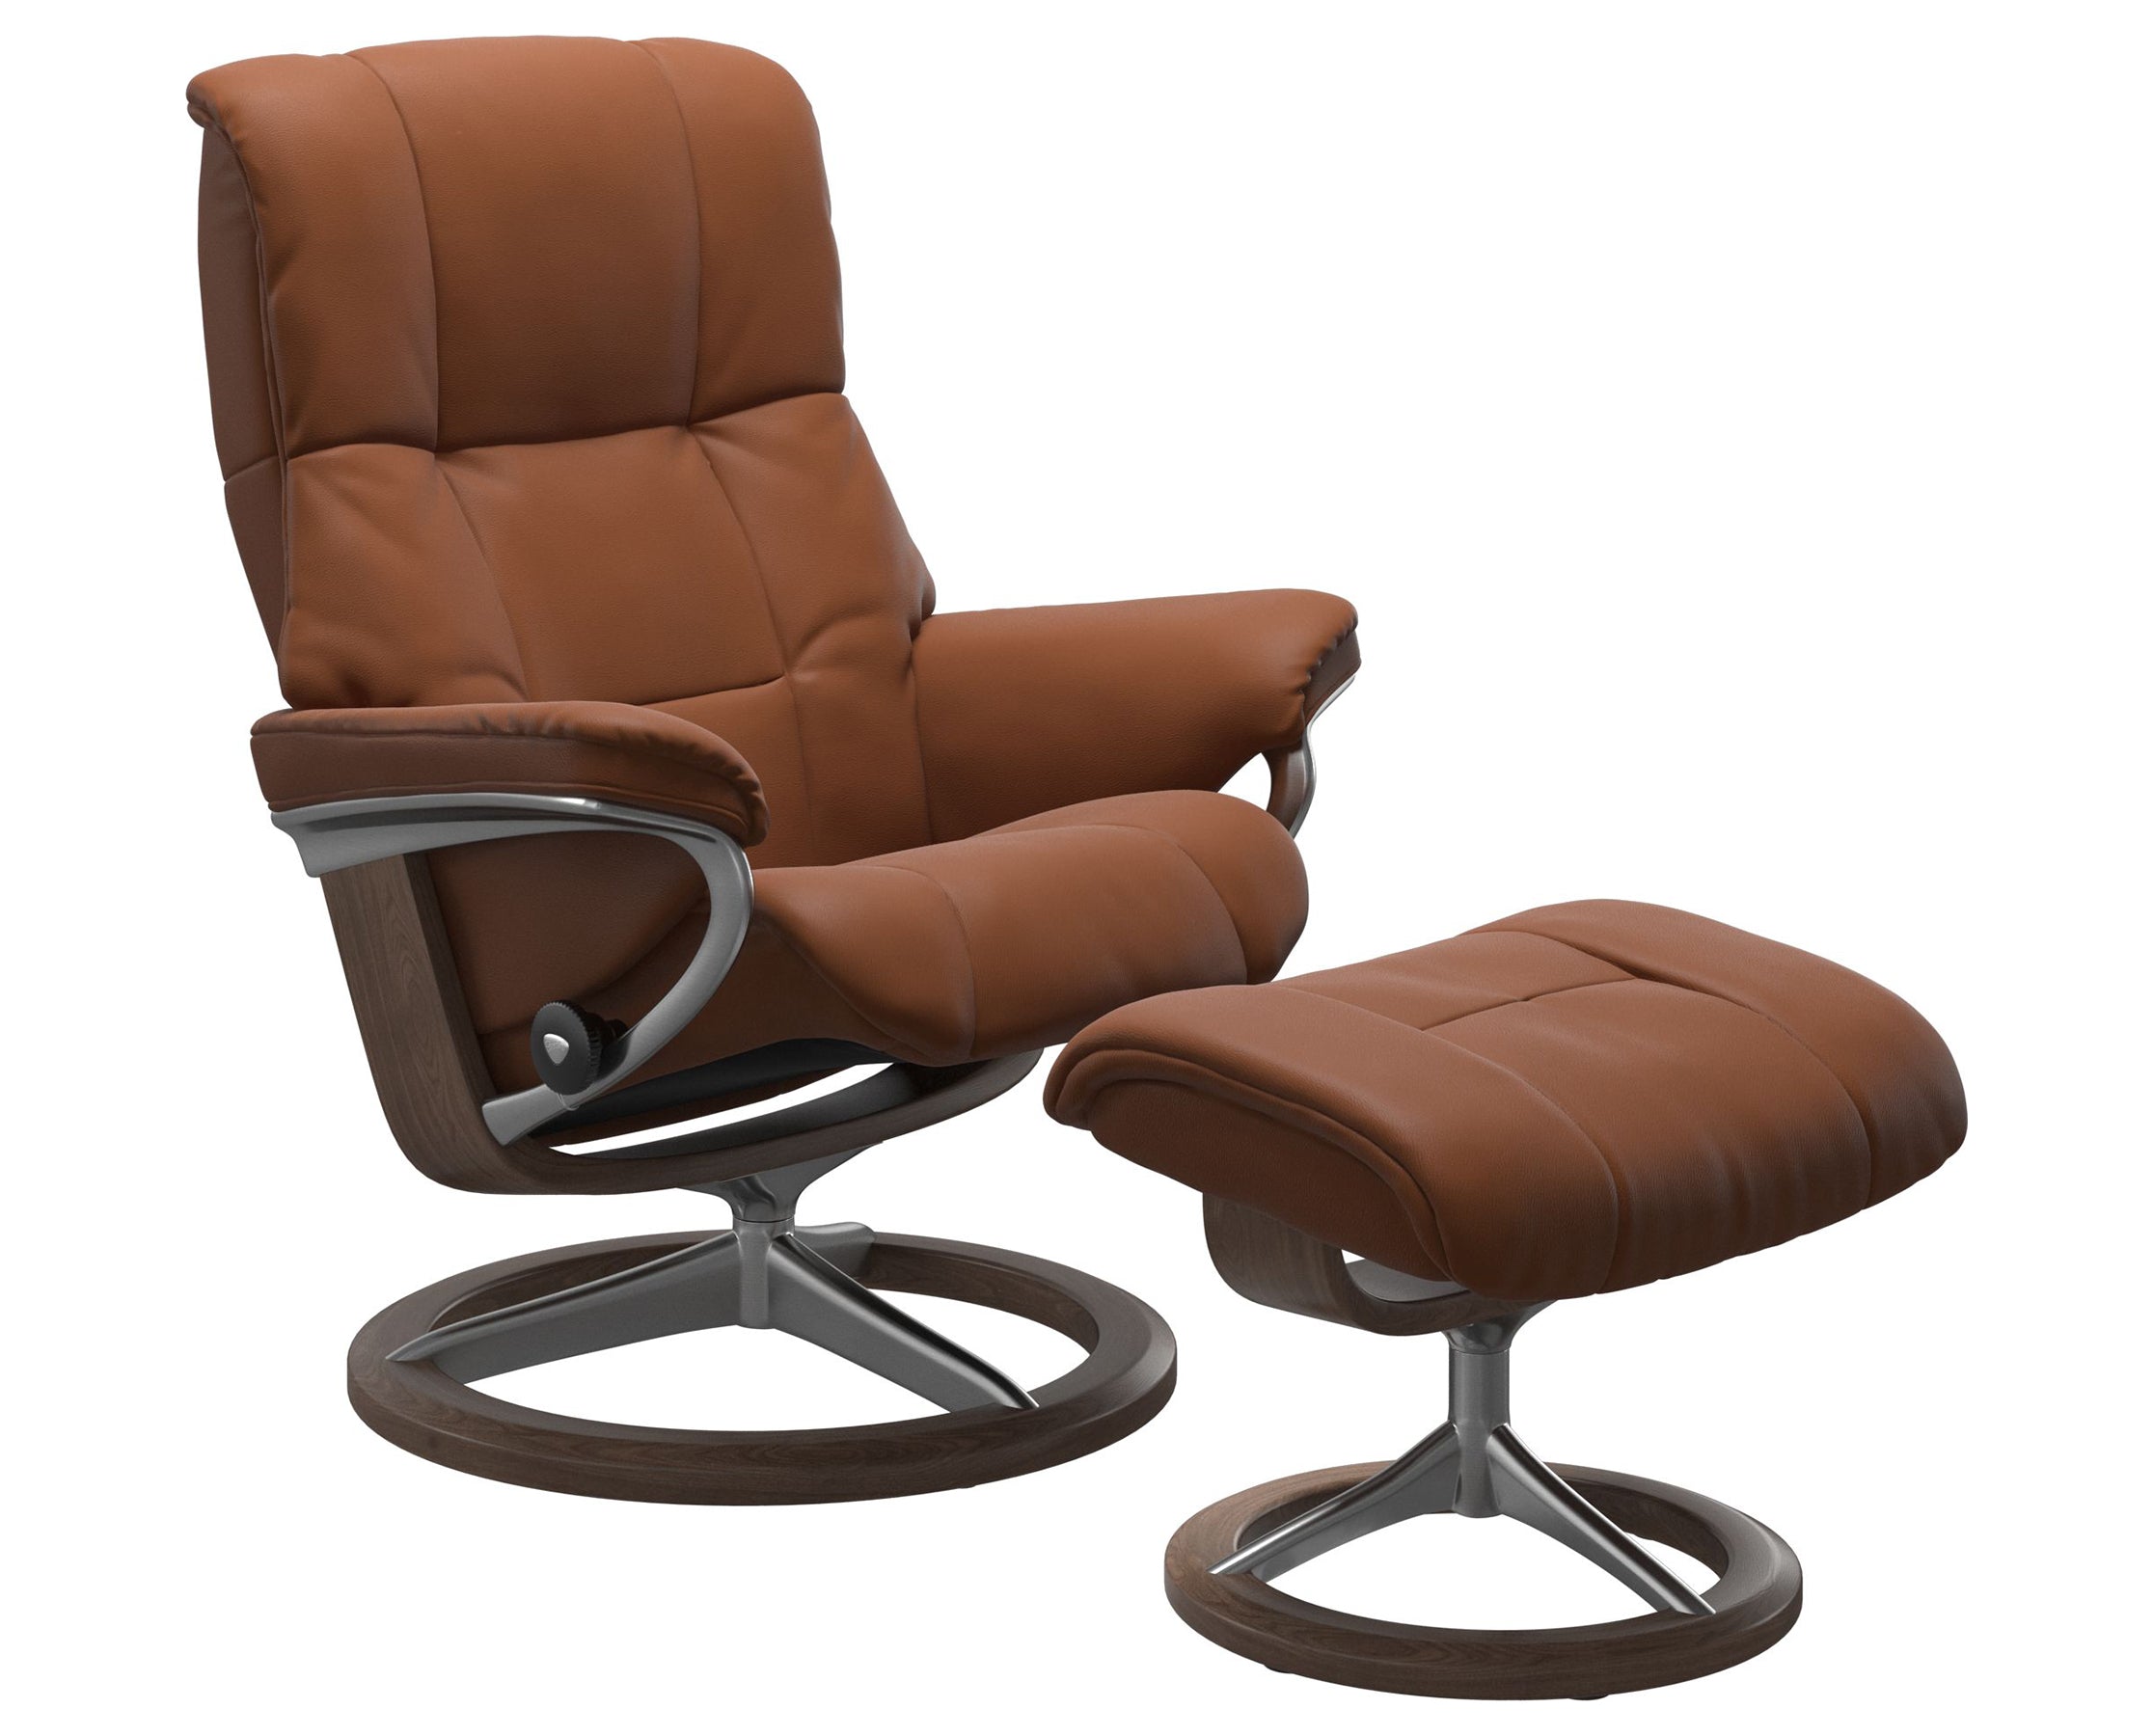 Paloma Leather New Cognac S/M/L and Walnut Base | Stressless Mayfair Signature Recliner | Valley Ridge Furniture